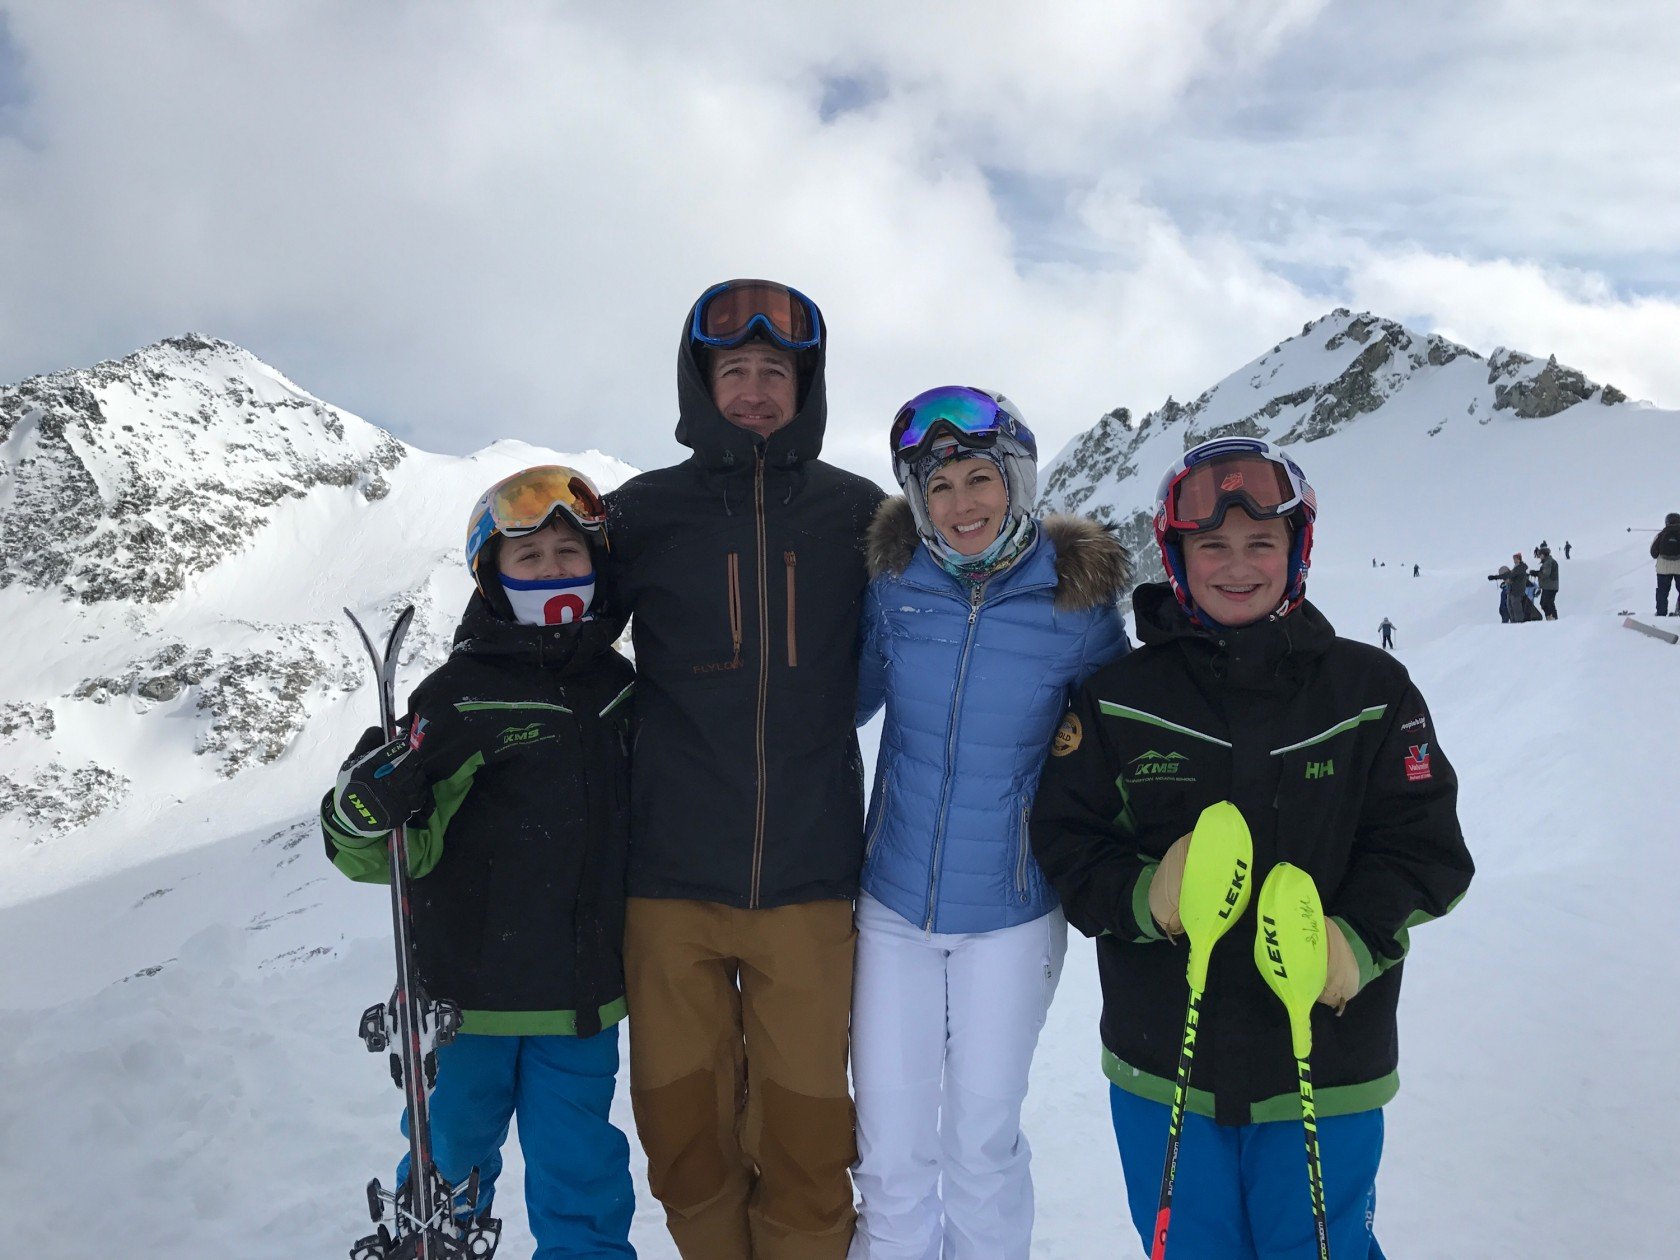 Ski racing dad Bryan Gras with wife Krissy and boys Evan and Tyler.